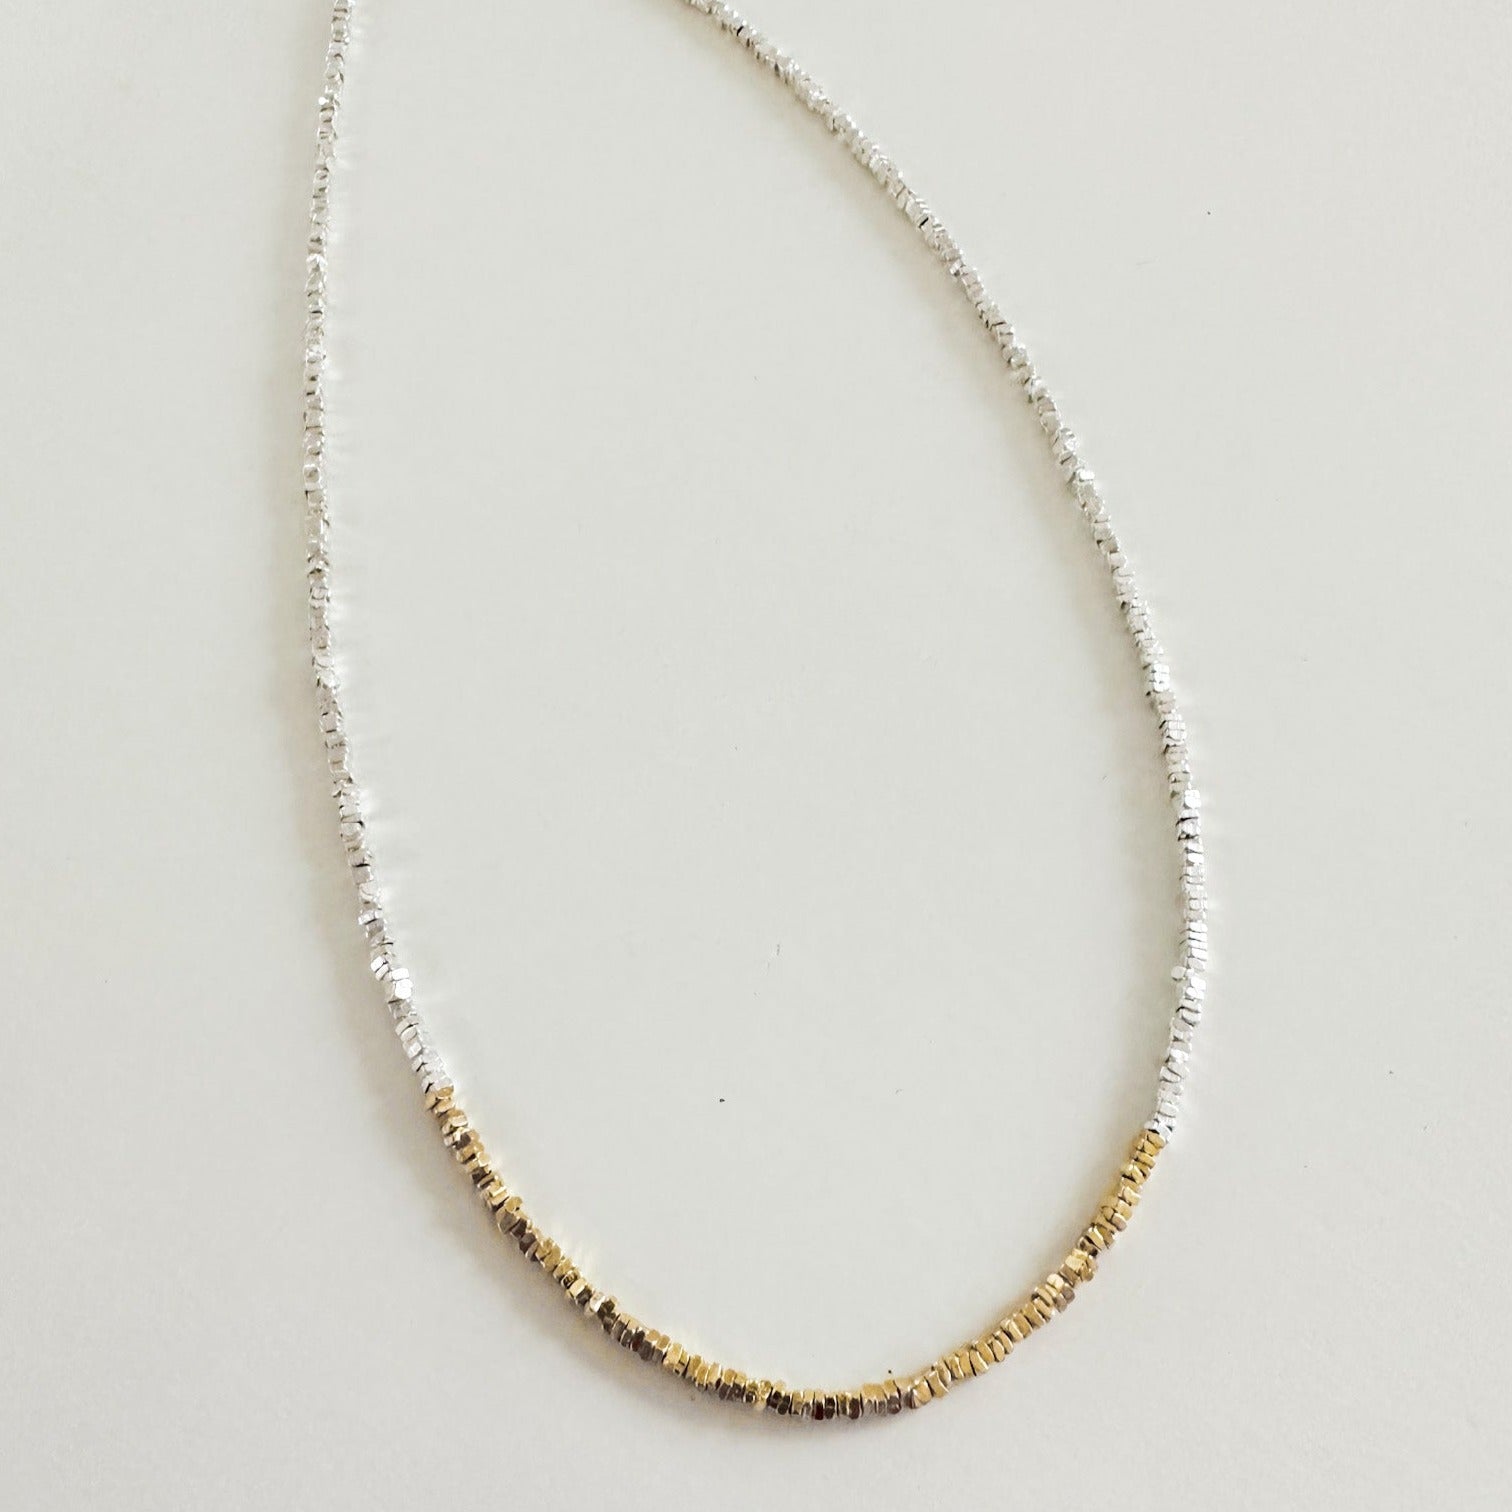 Gold and Silver Two tone neckalce